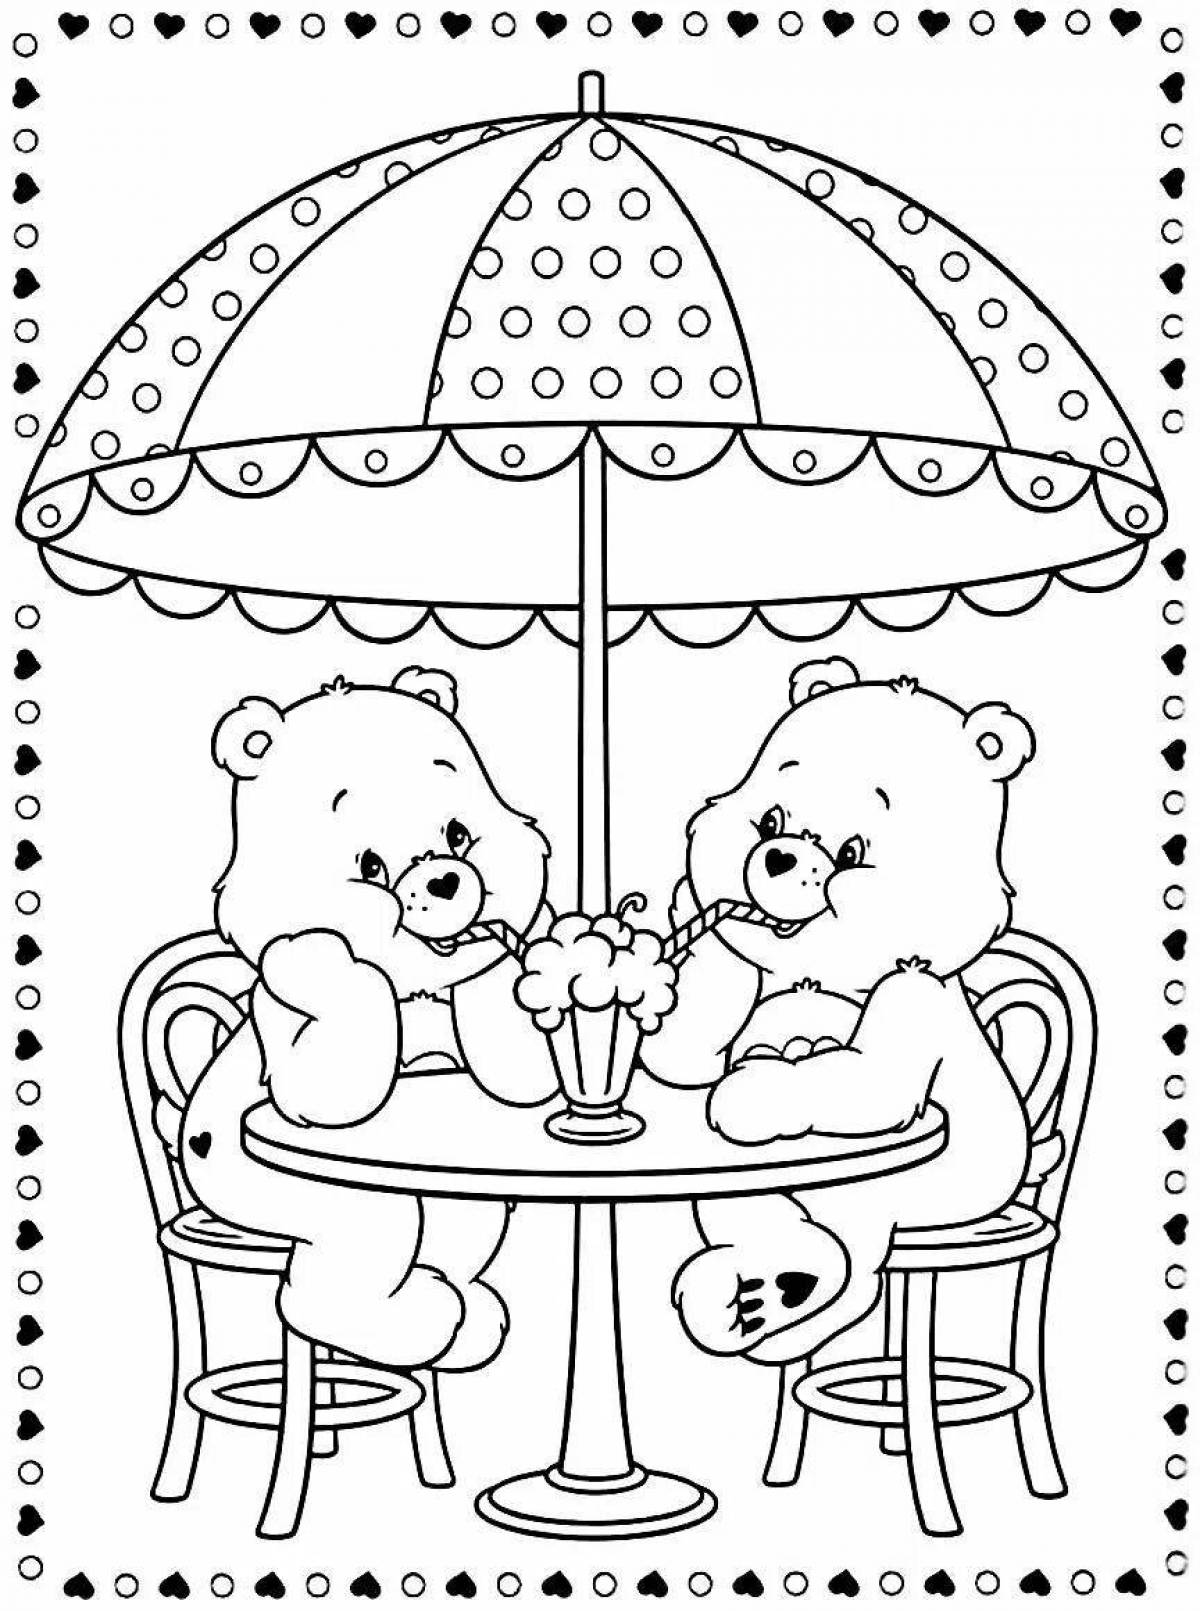 Coloring funny bear family